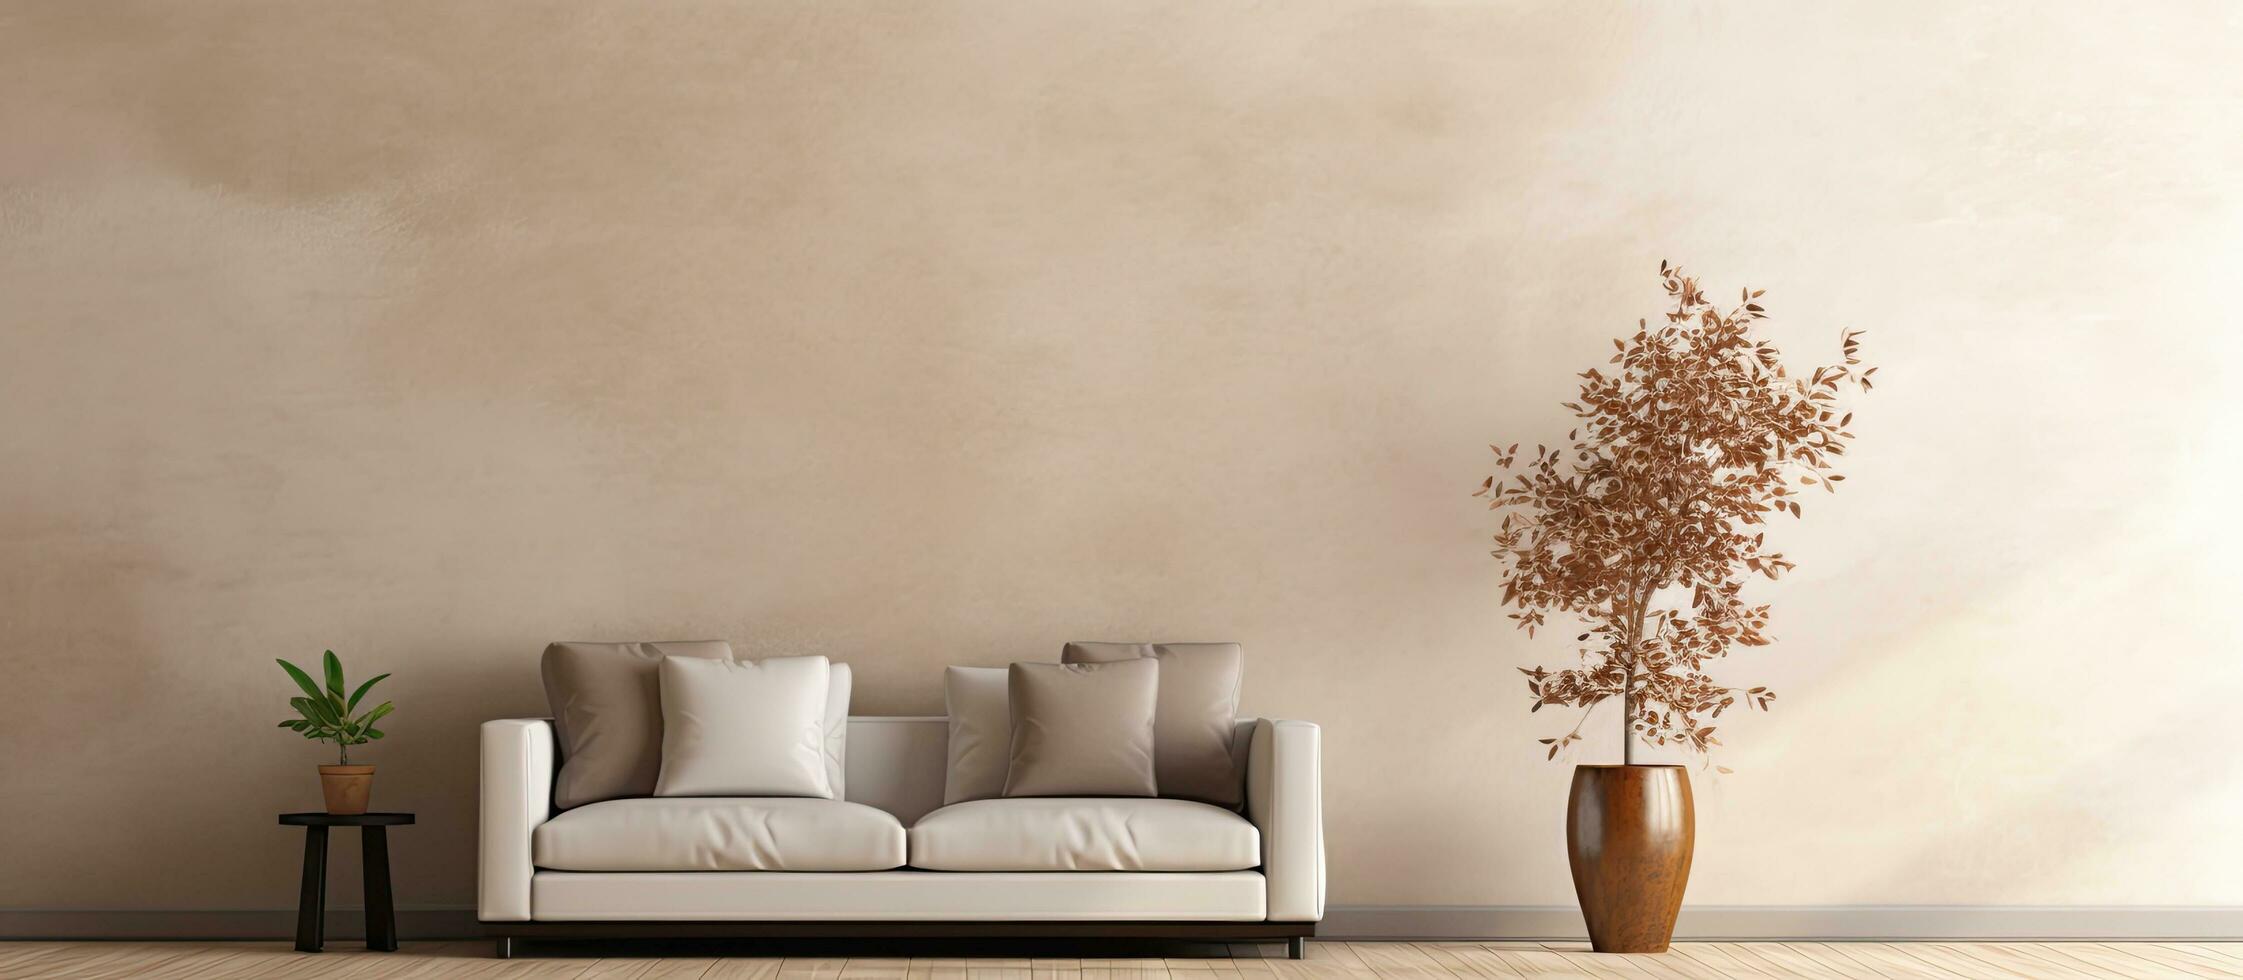 template for a minimalist home decor with a beige sofa, side table, leaf in a vase, pouf, elegant photo